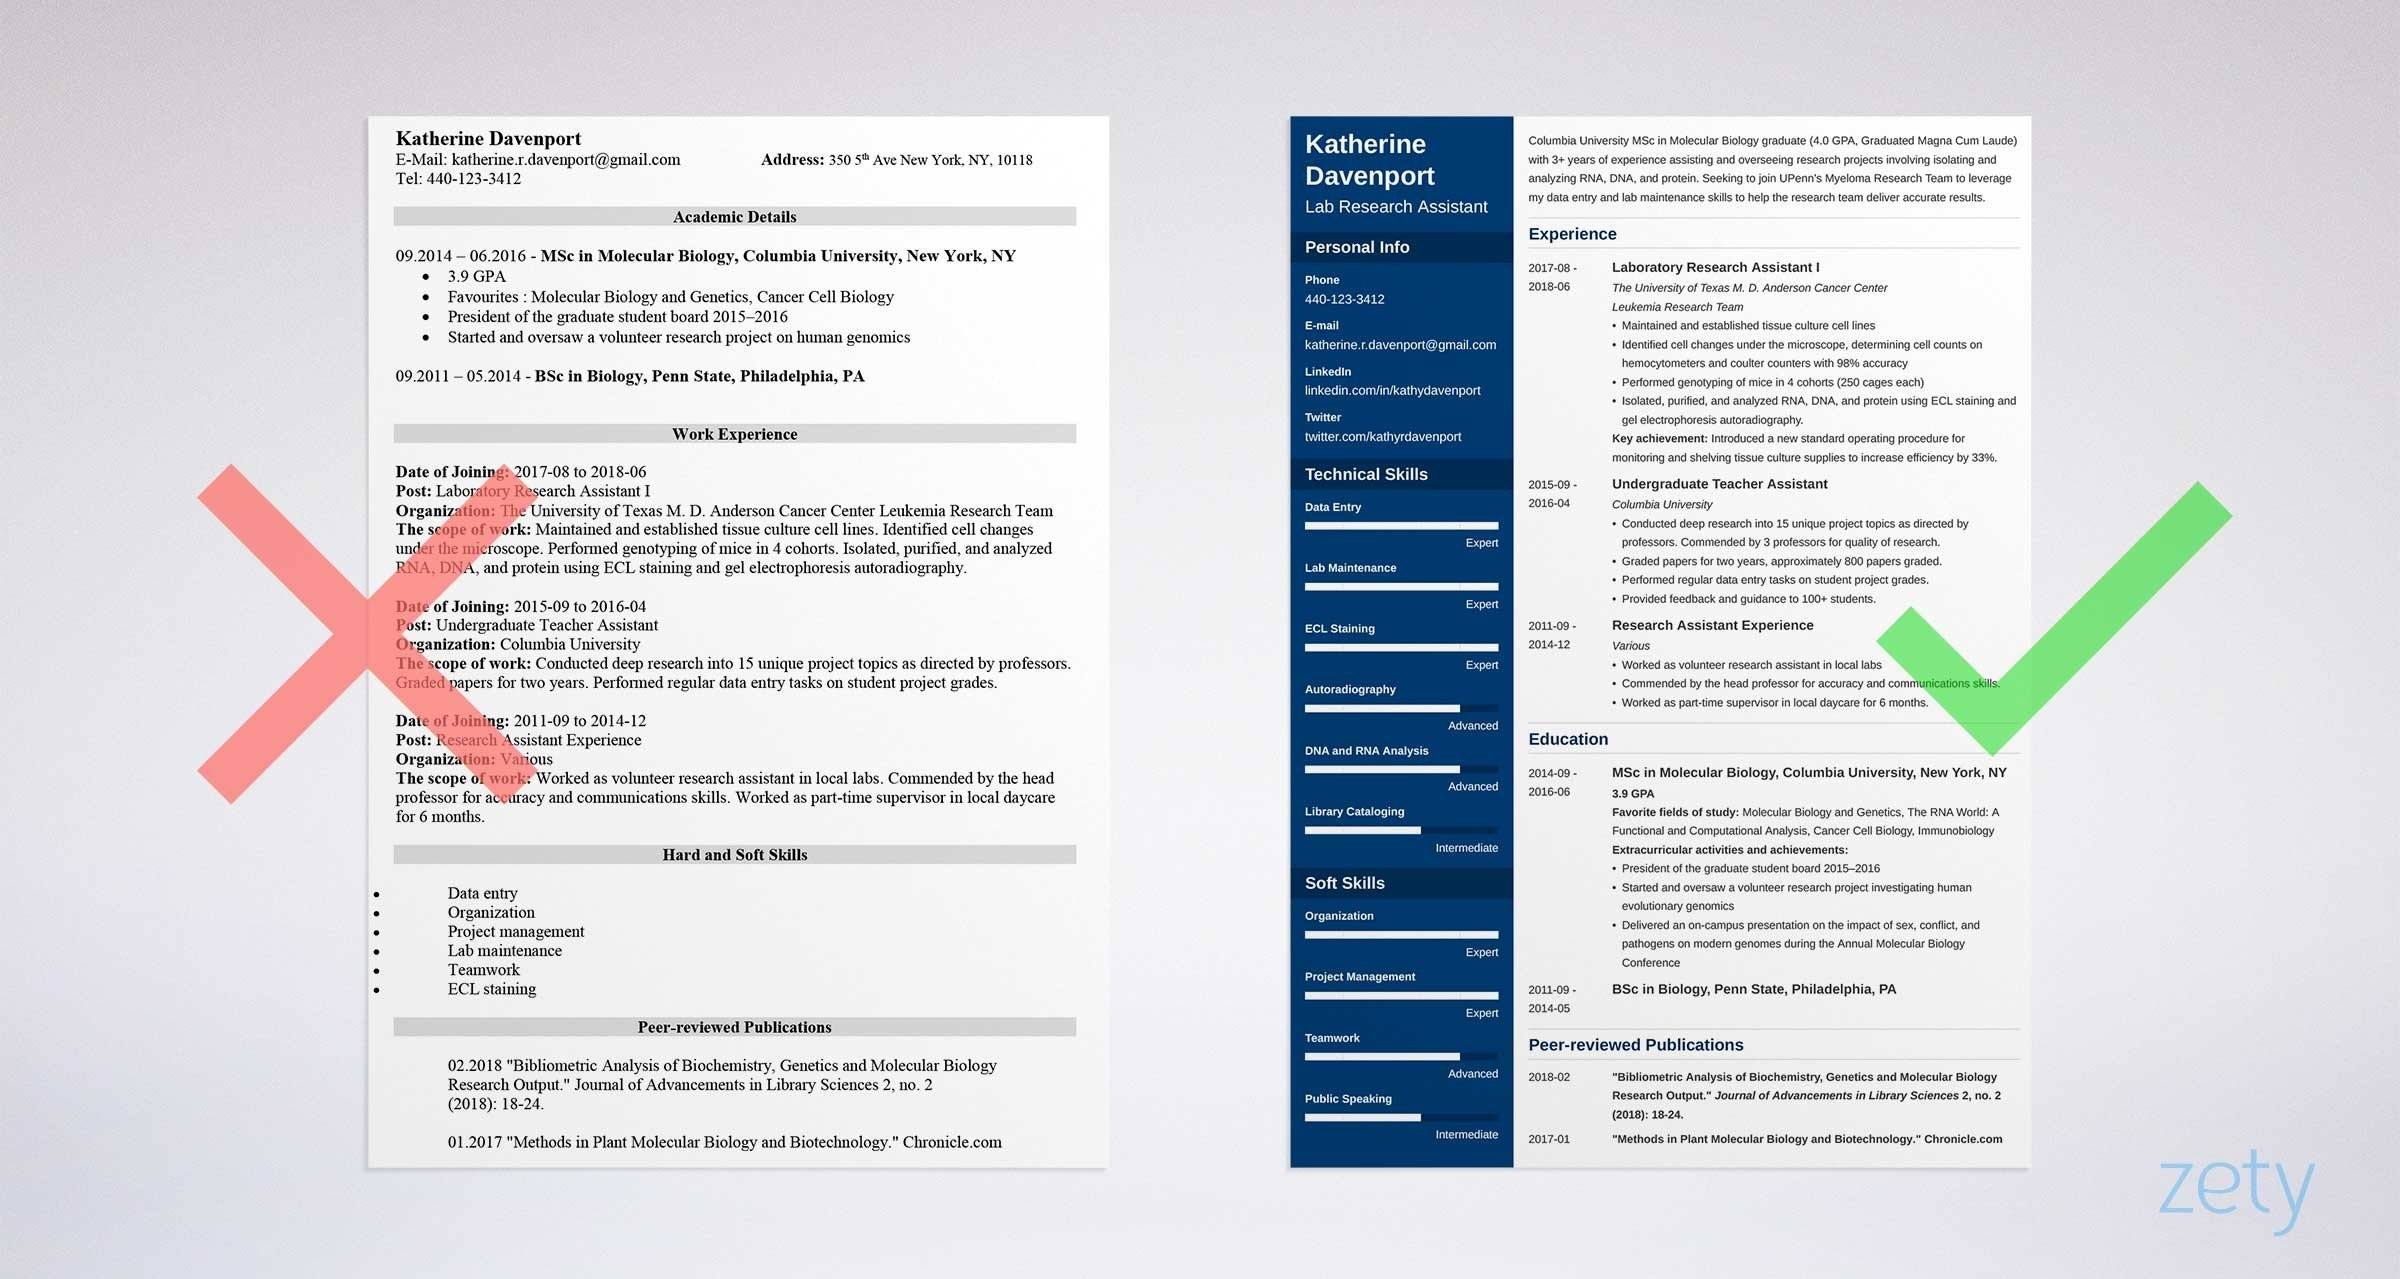 Sample Resume for Graduate Research assistant Research assistant Resume: Sample Job Description & Skills